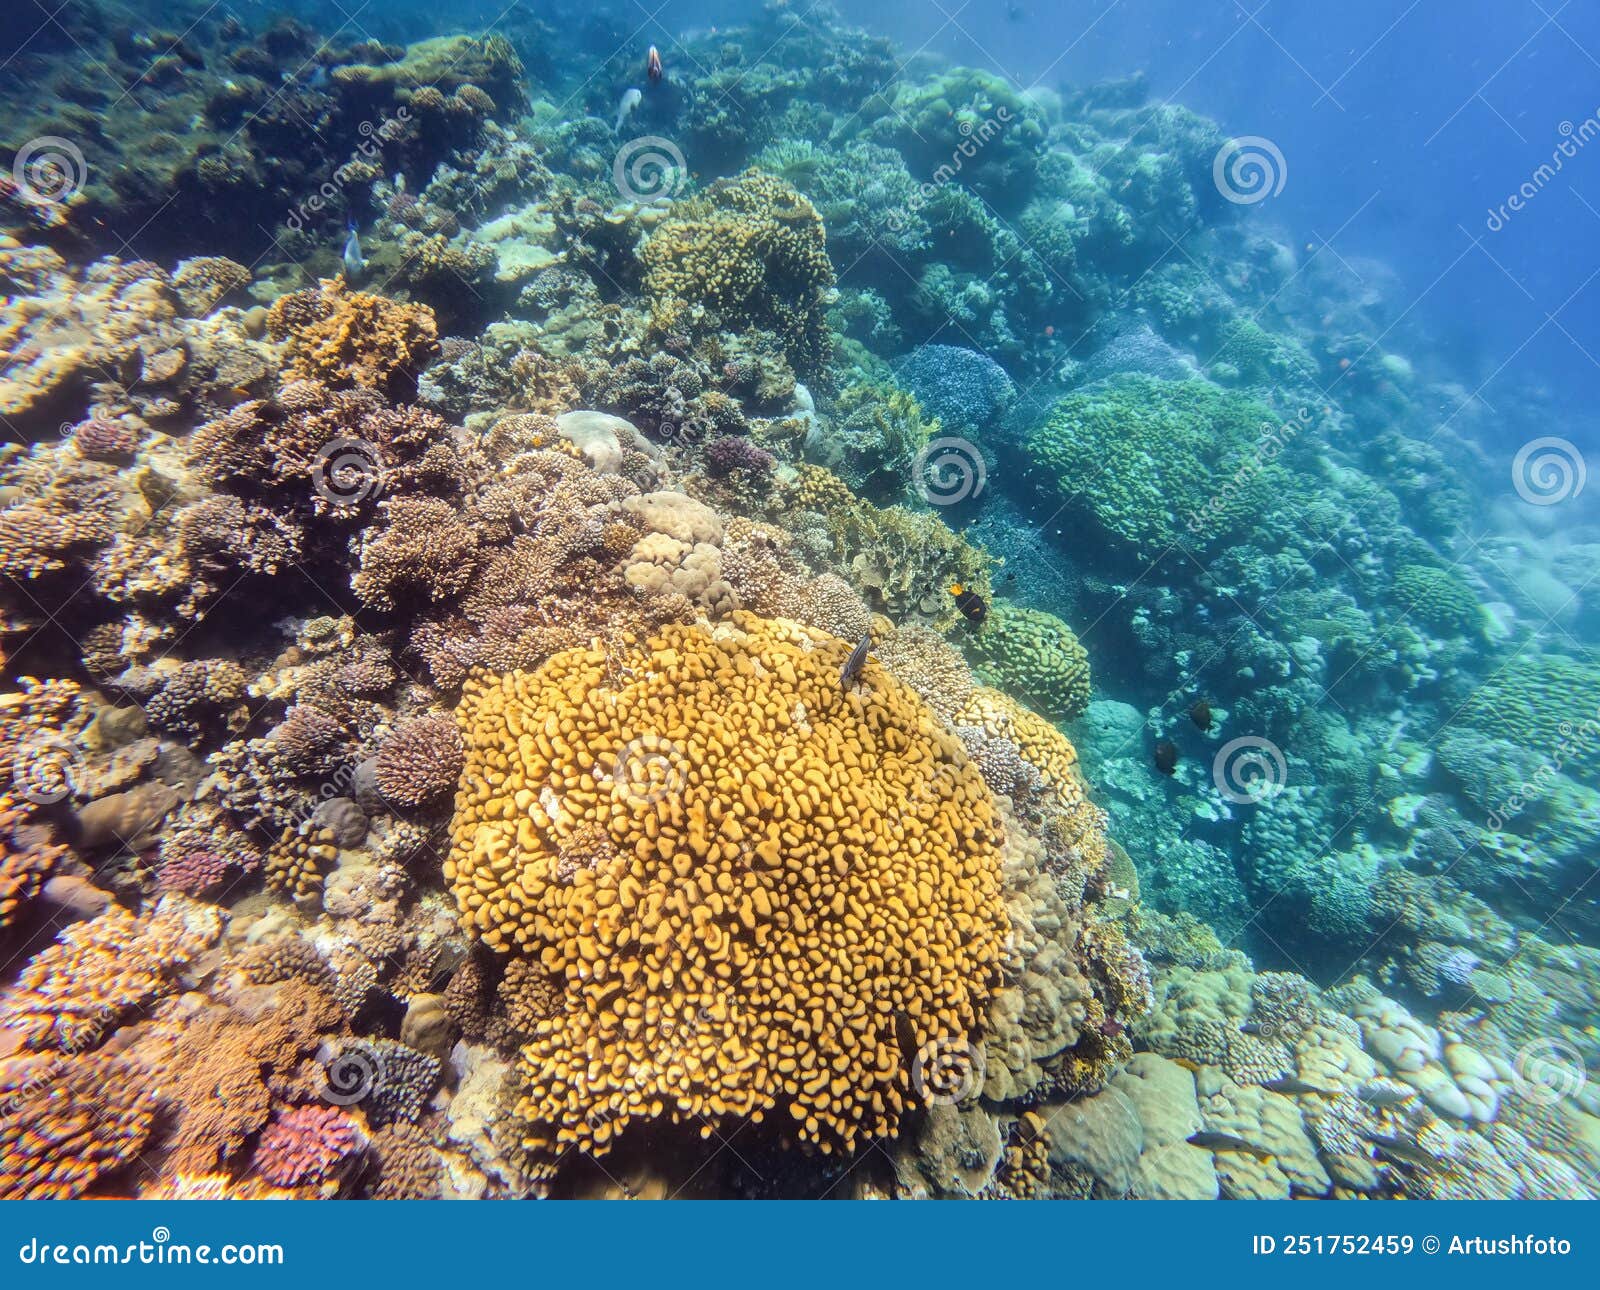 Coral Reef Garden in Red Sea, Marsa Alam Egypt Stock Image - Image of ...